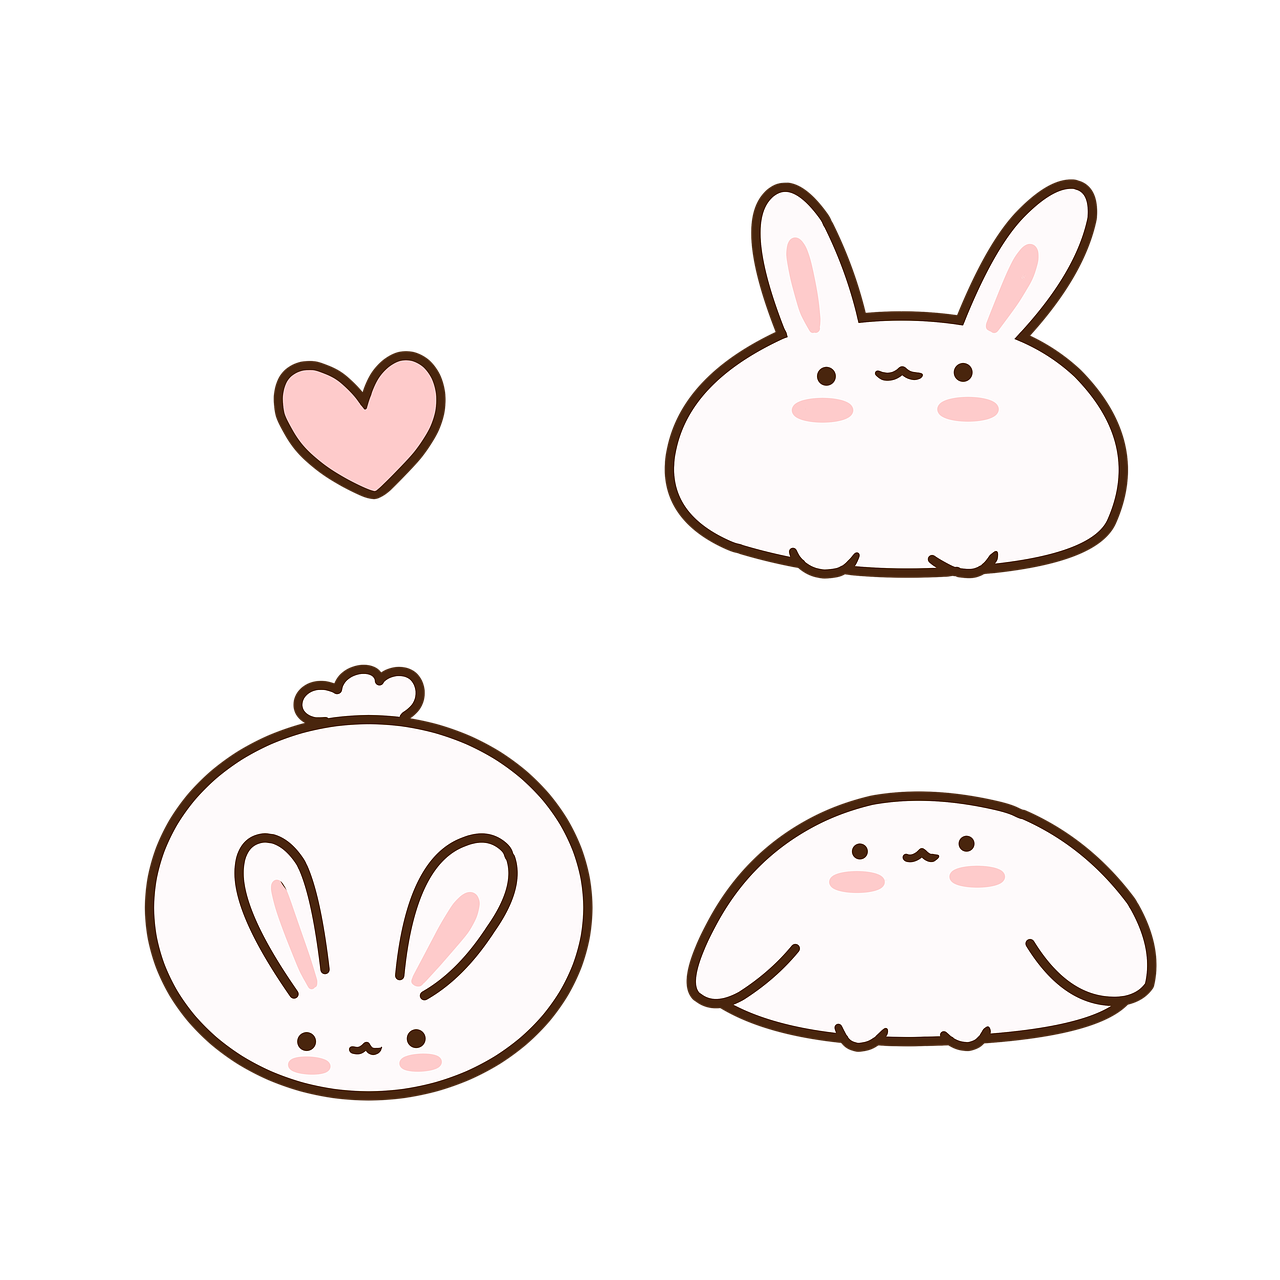 a couple of white rabbits sitting next to each other, inspired by Kanbun Master, sticker design vector art, on black background, extremely cute anime girl face, animal - shaped bread